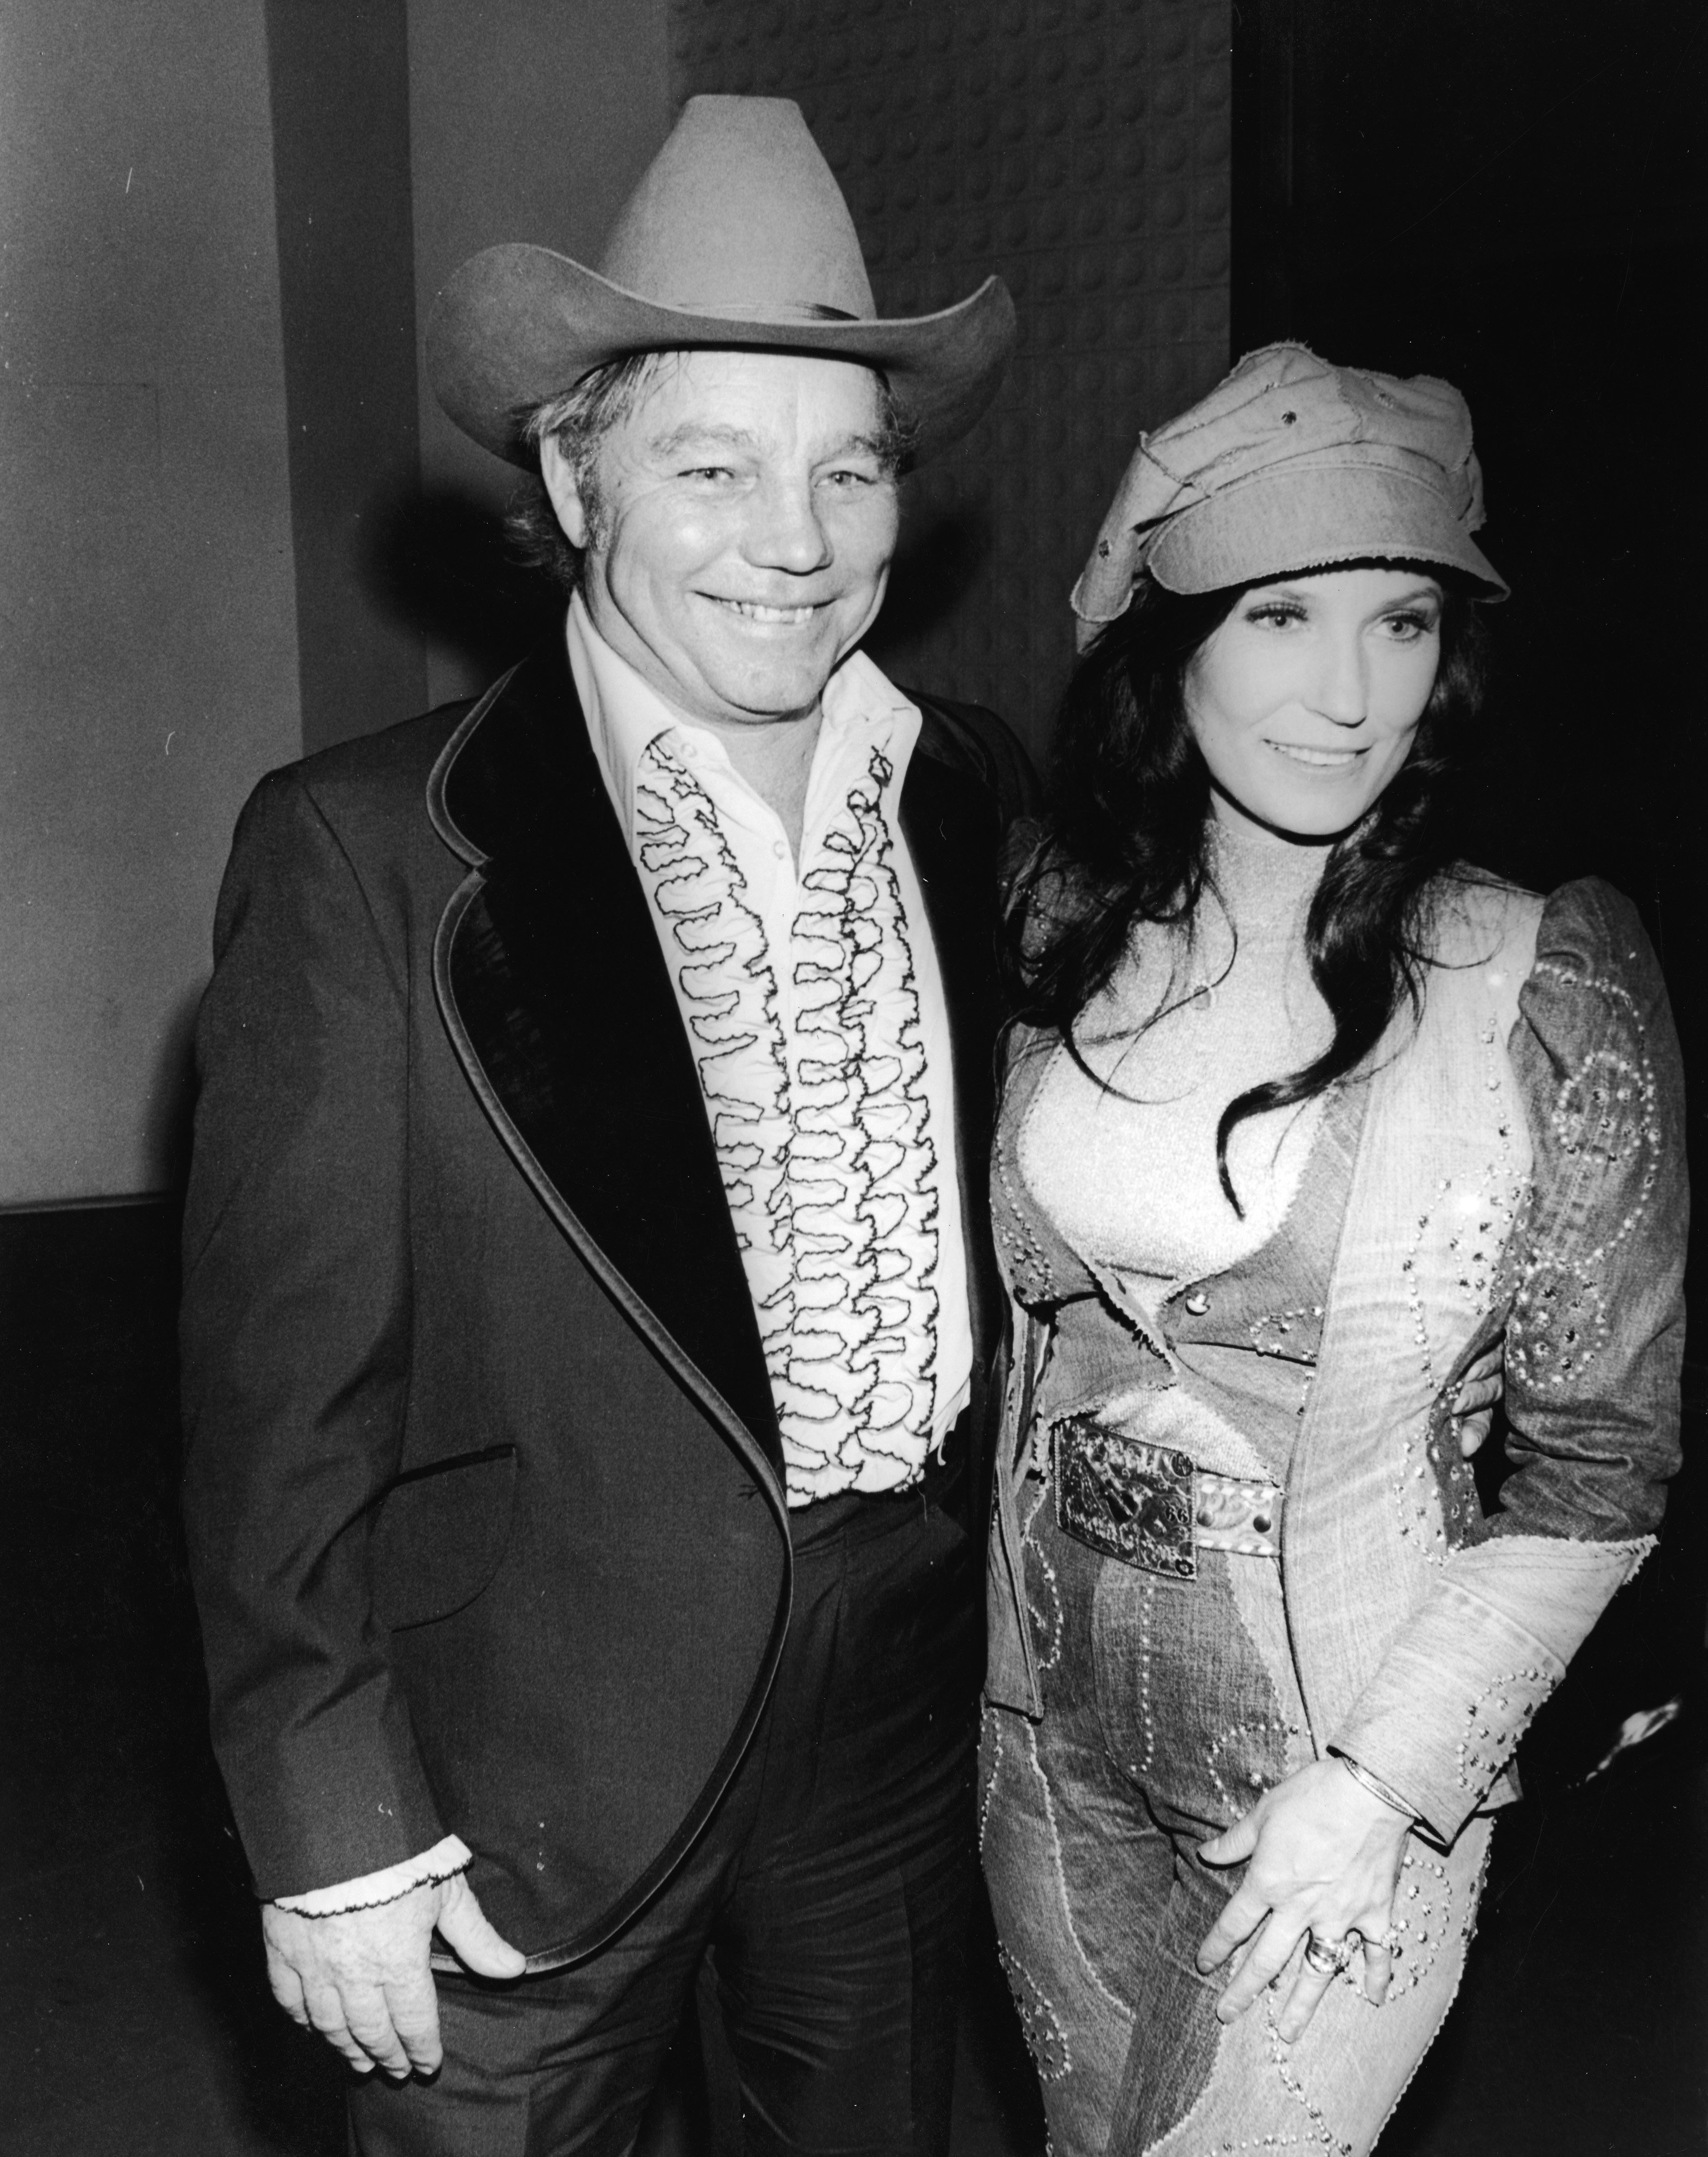 American country music singer and guitarist Loretta Lynn and her husband Oliver Lynn, Jr. (also known as Mooney) (1948 - 1996) at the Country & Western Music Awards, Hollywood, California, February 27, 1975. | Source: Getty Images